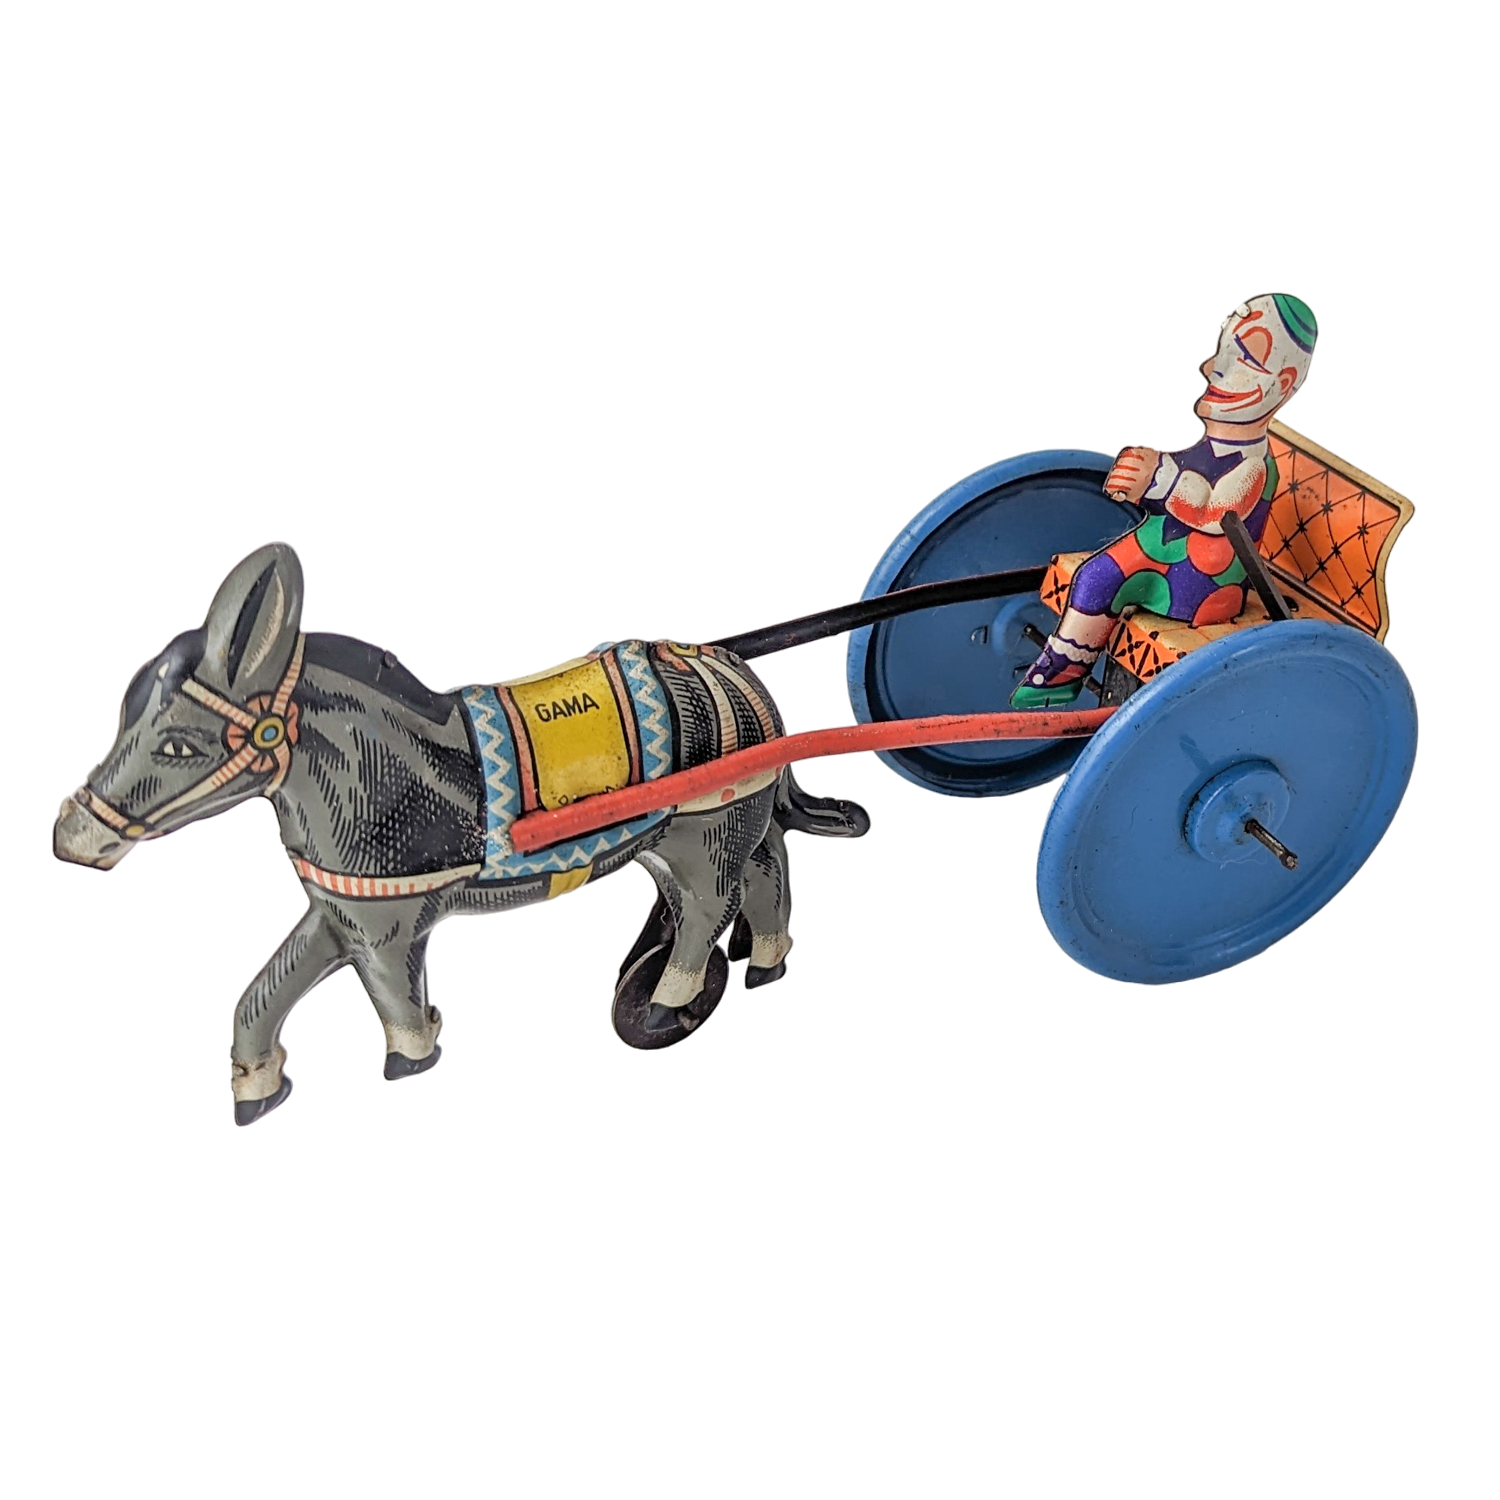 Vintage German Wind Up Clown and Donkey Cart